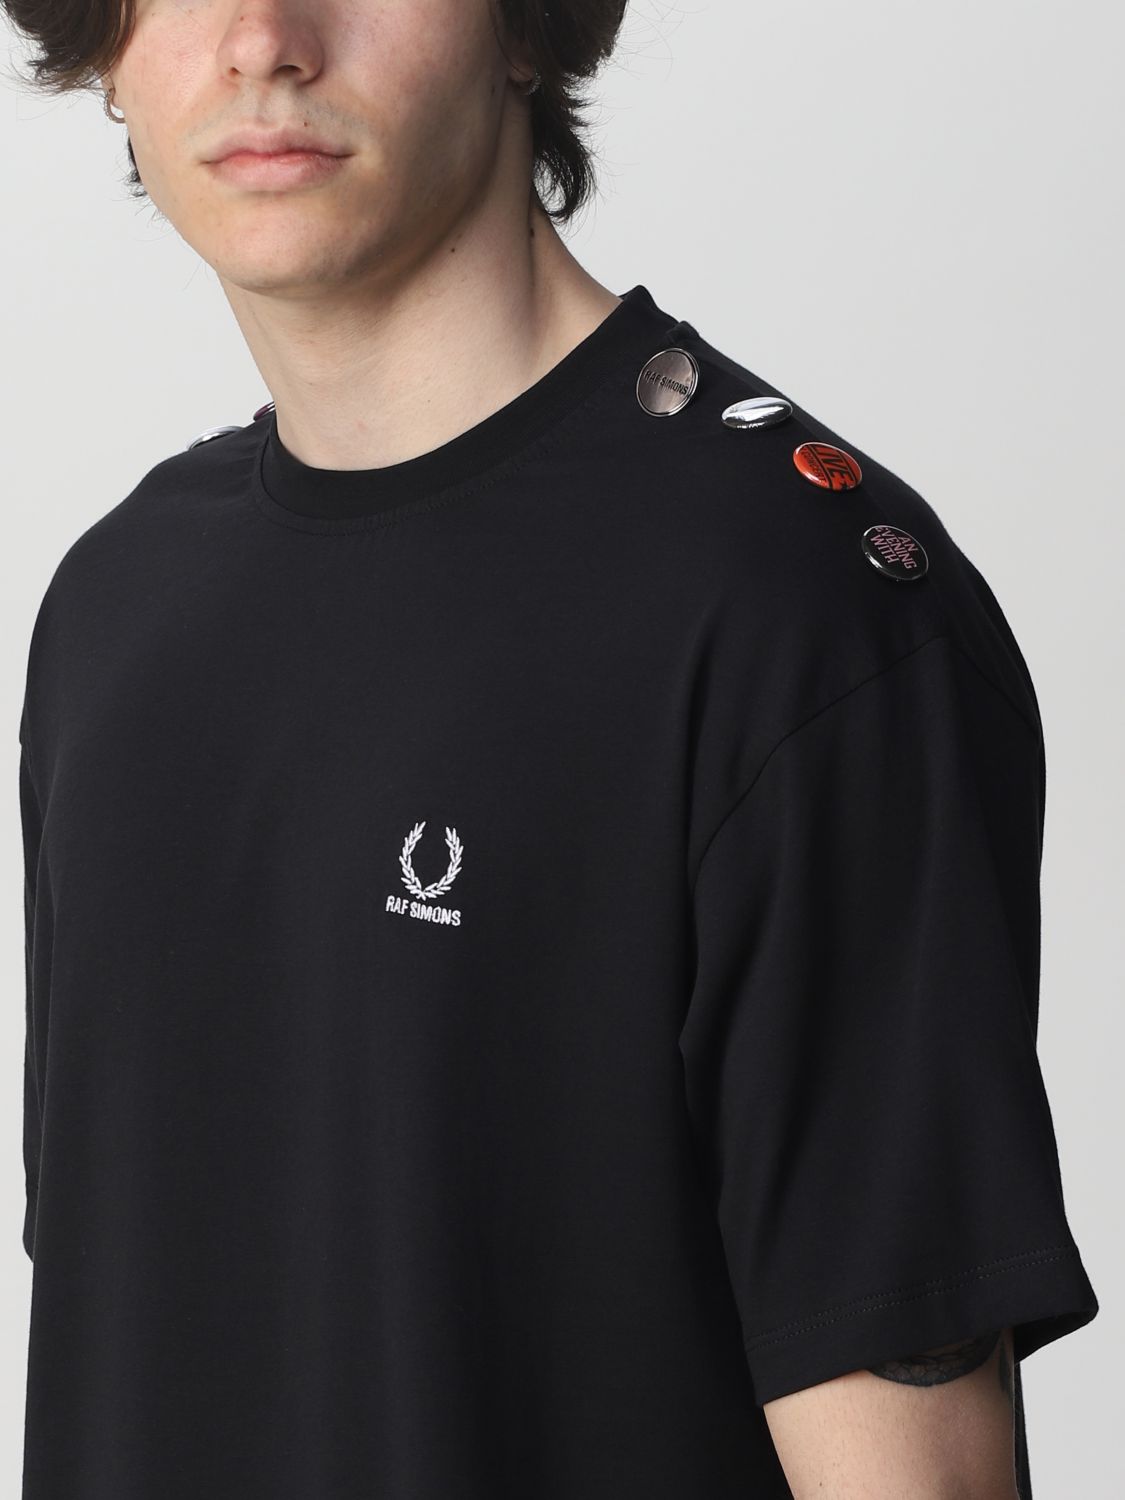 T-Shirt Fred Perry By Raf Simons: Fred Perry By Raf Simons Herren T-Shirt schwarz 3